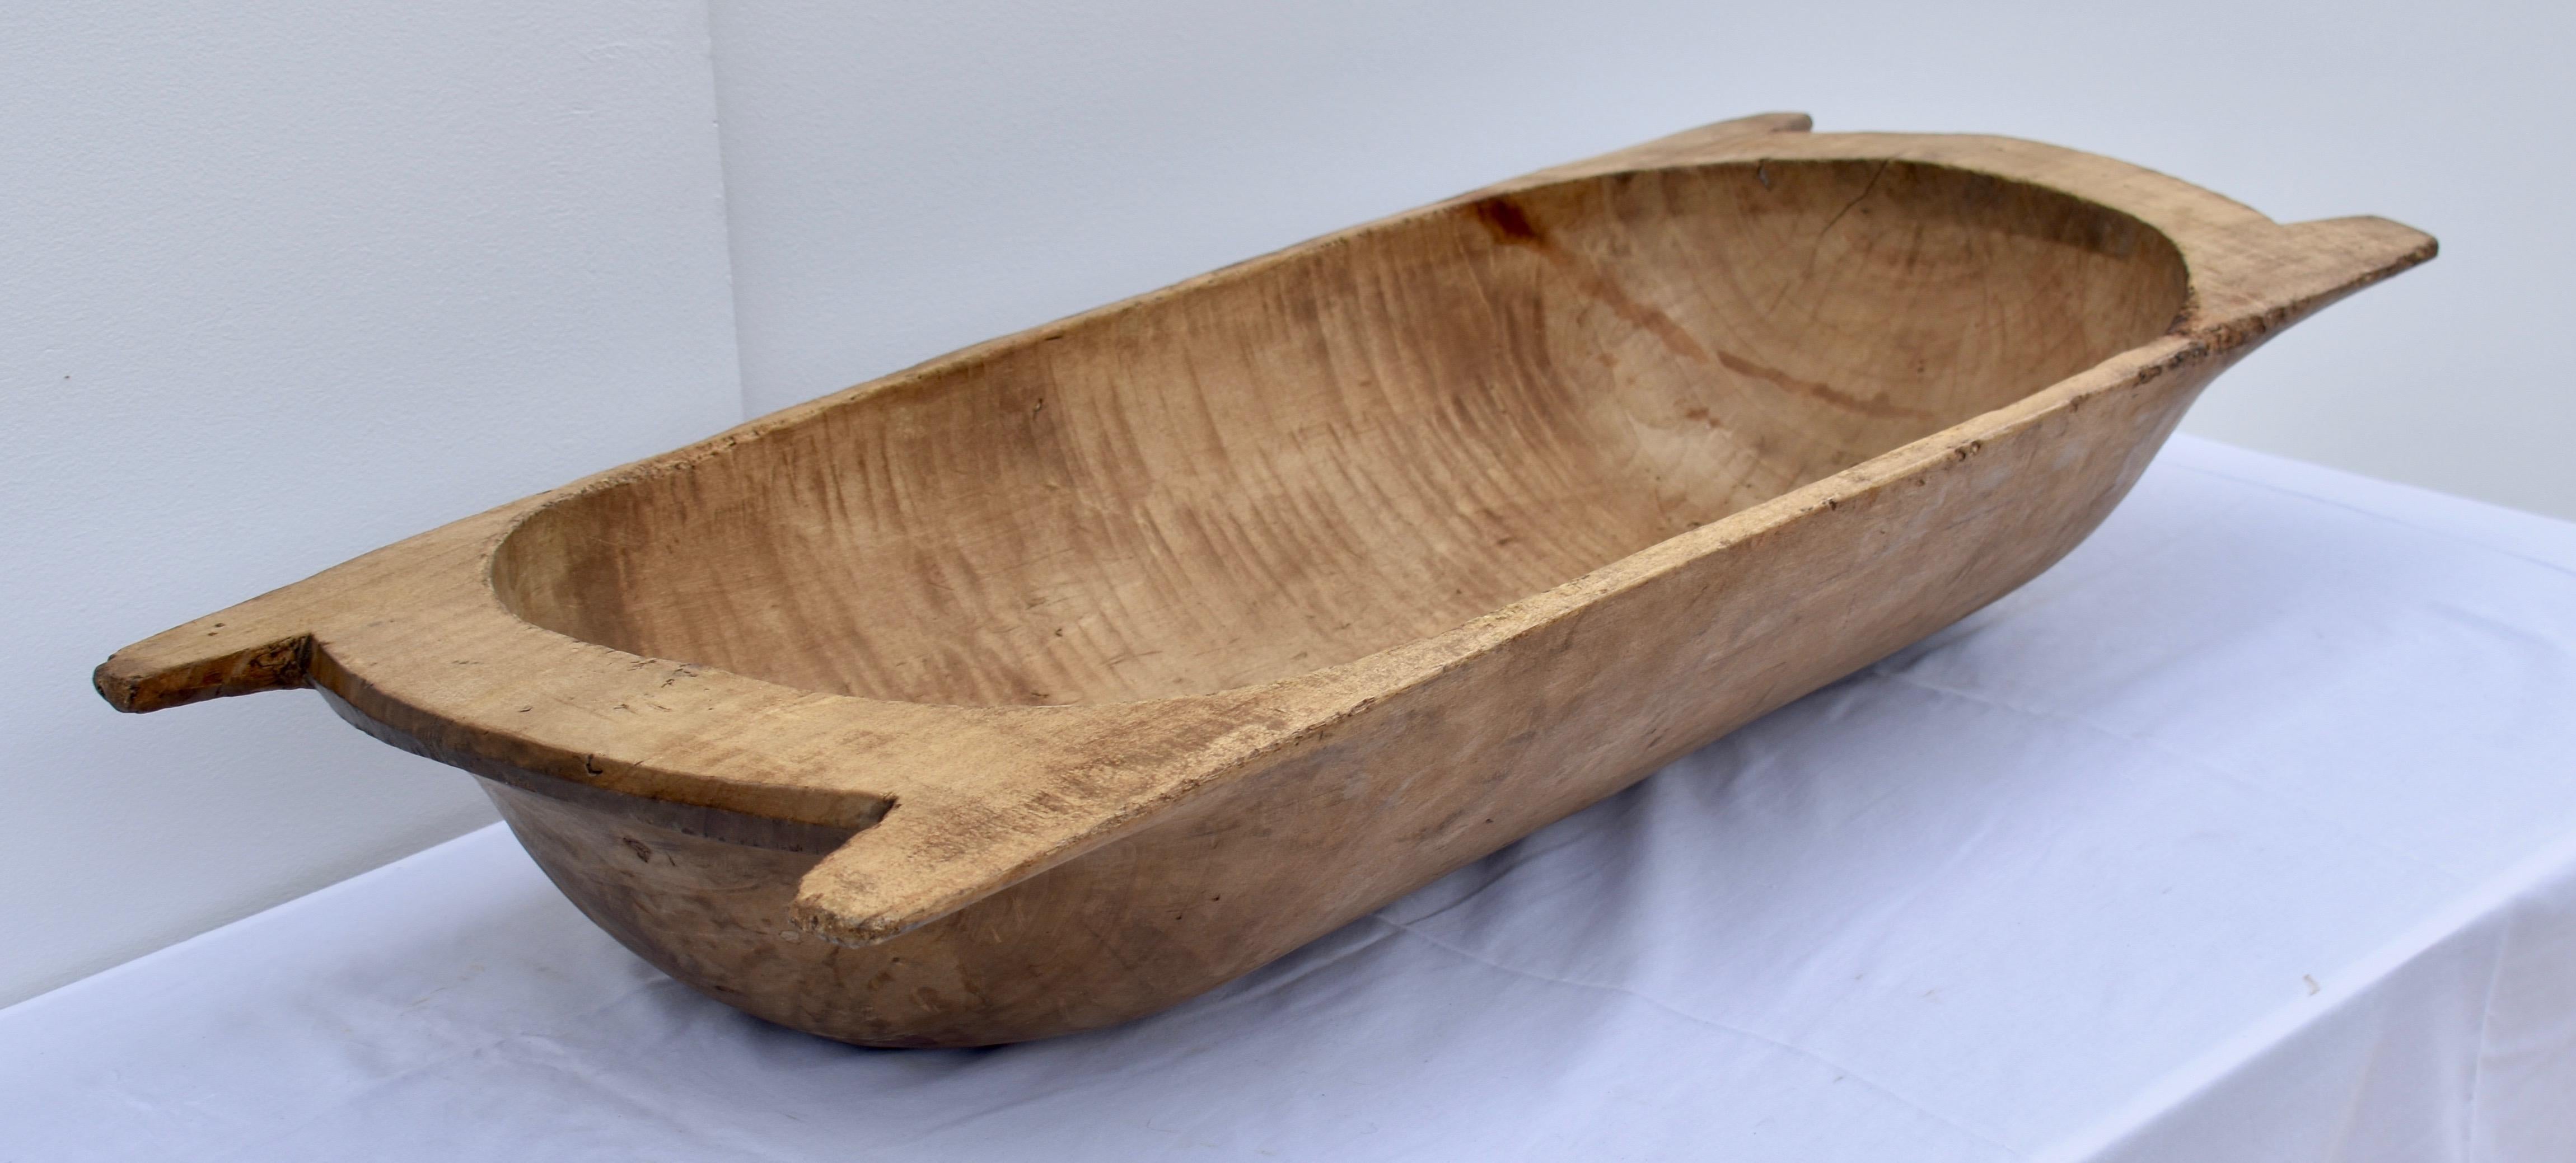 Our European antique wooden dough bowls or trogs are hand-hewn from whole split logs. They feature remarkable handiwork and a beautiful patina, especially when viewed from the underside. They all show signs of purposeful use. Some have small cracks,